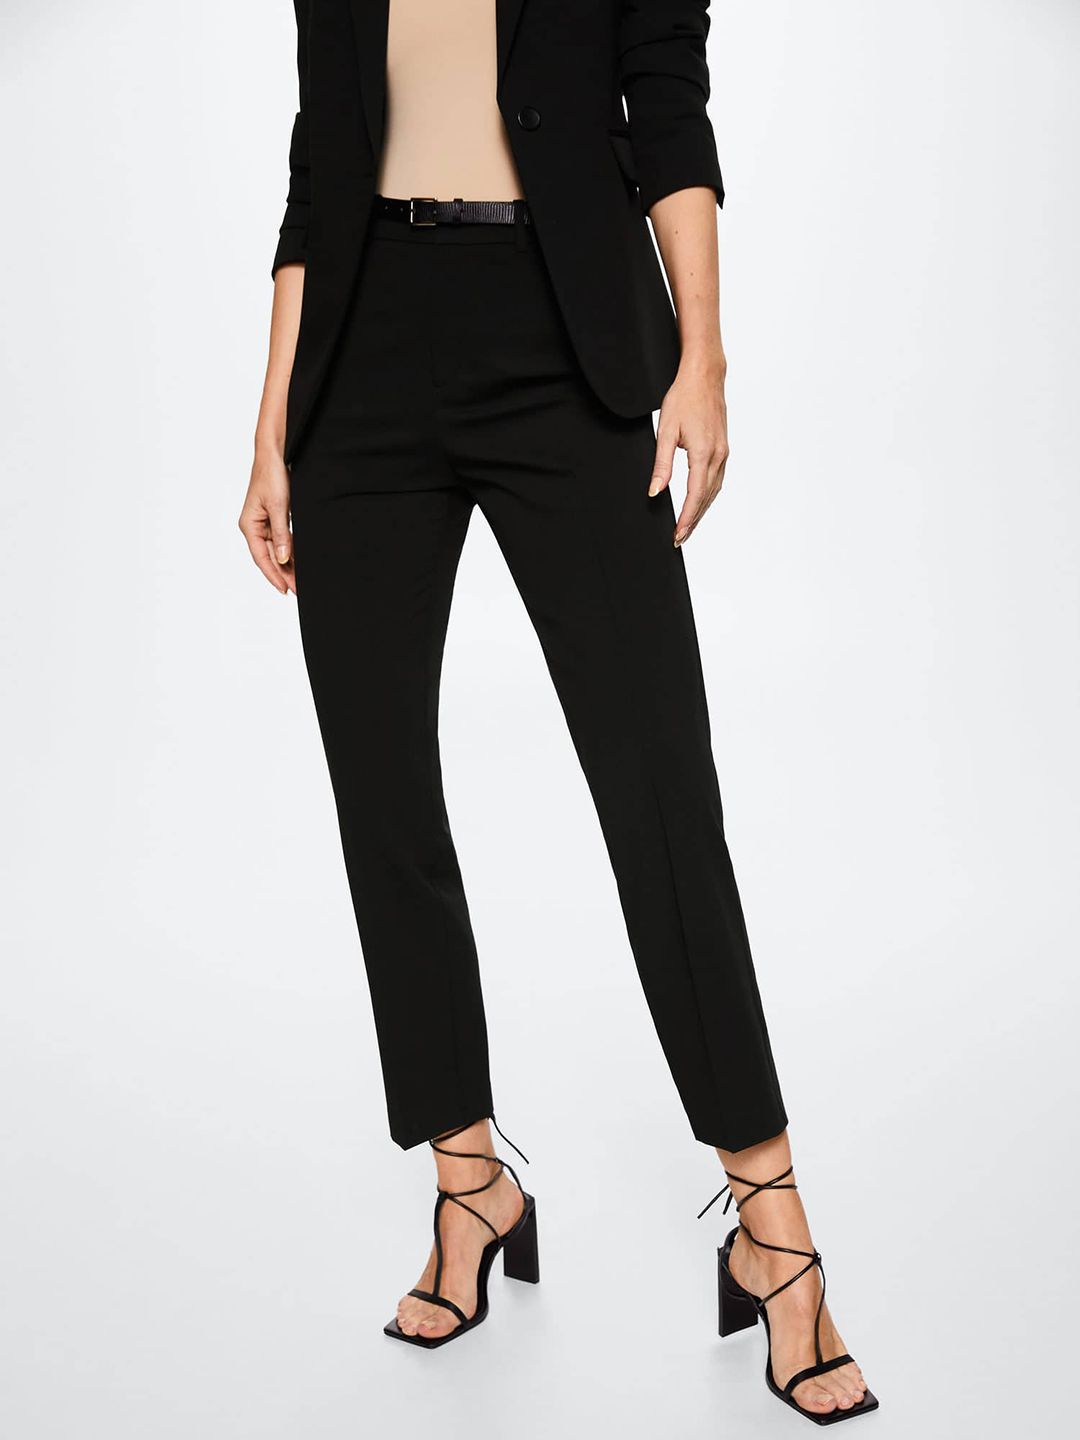 MANGO Women Black Solid Trousers Price in India